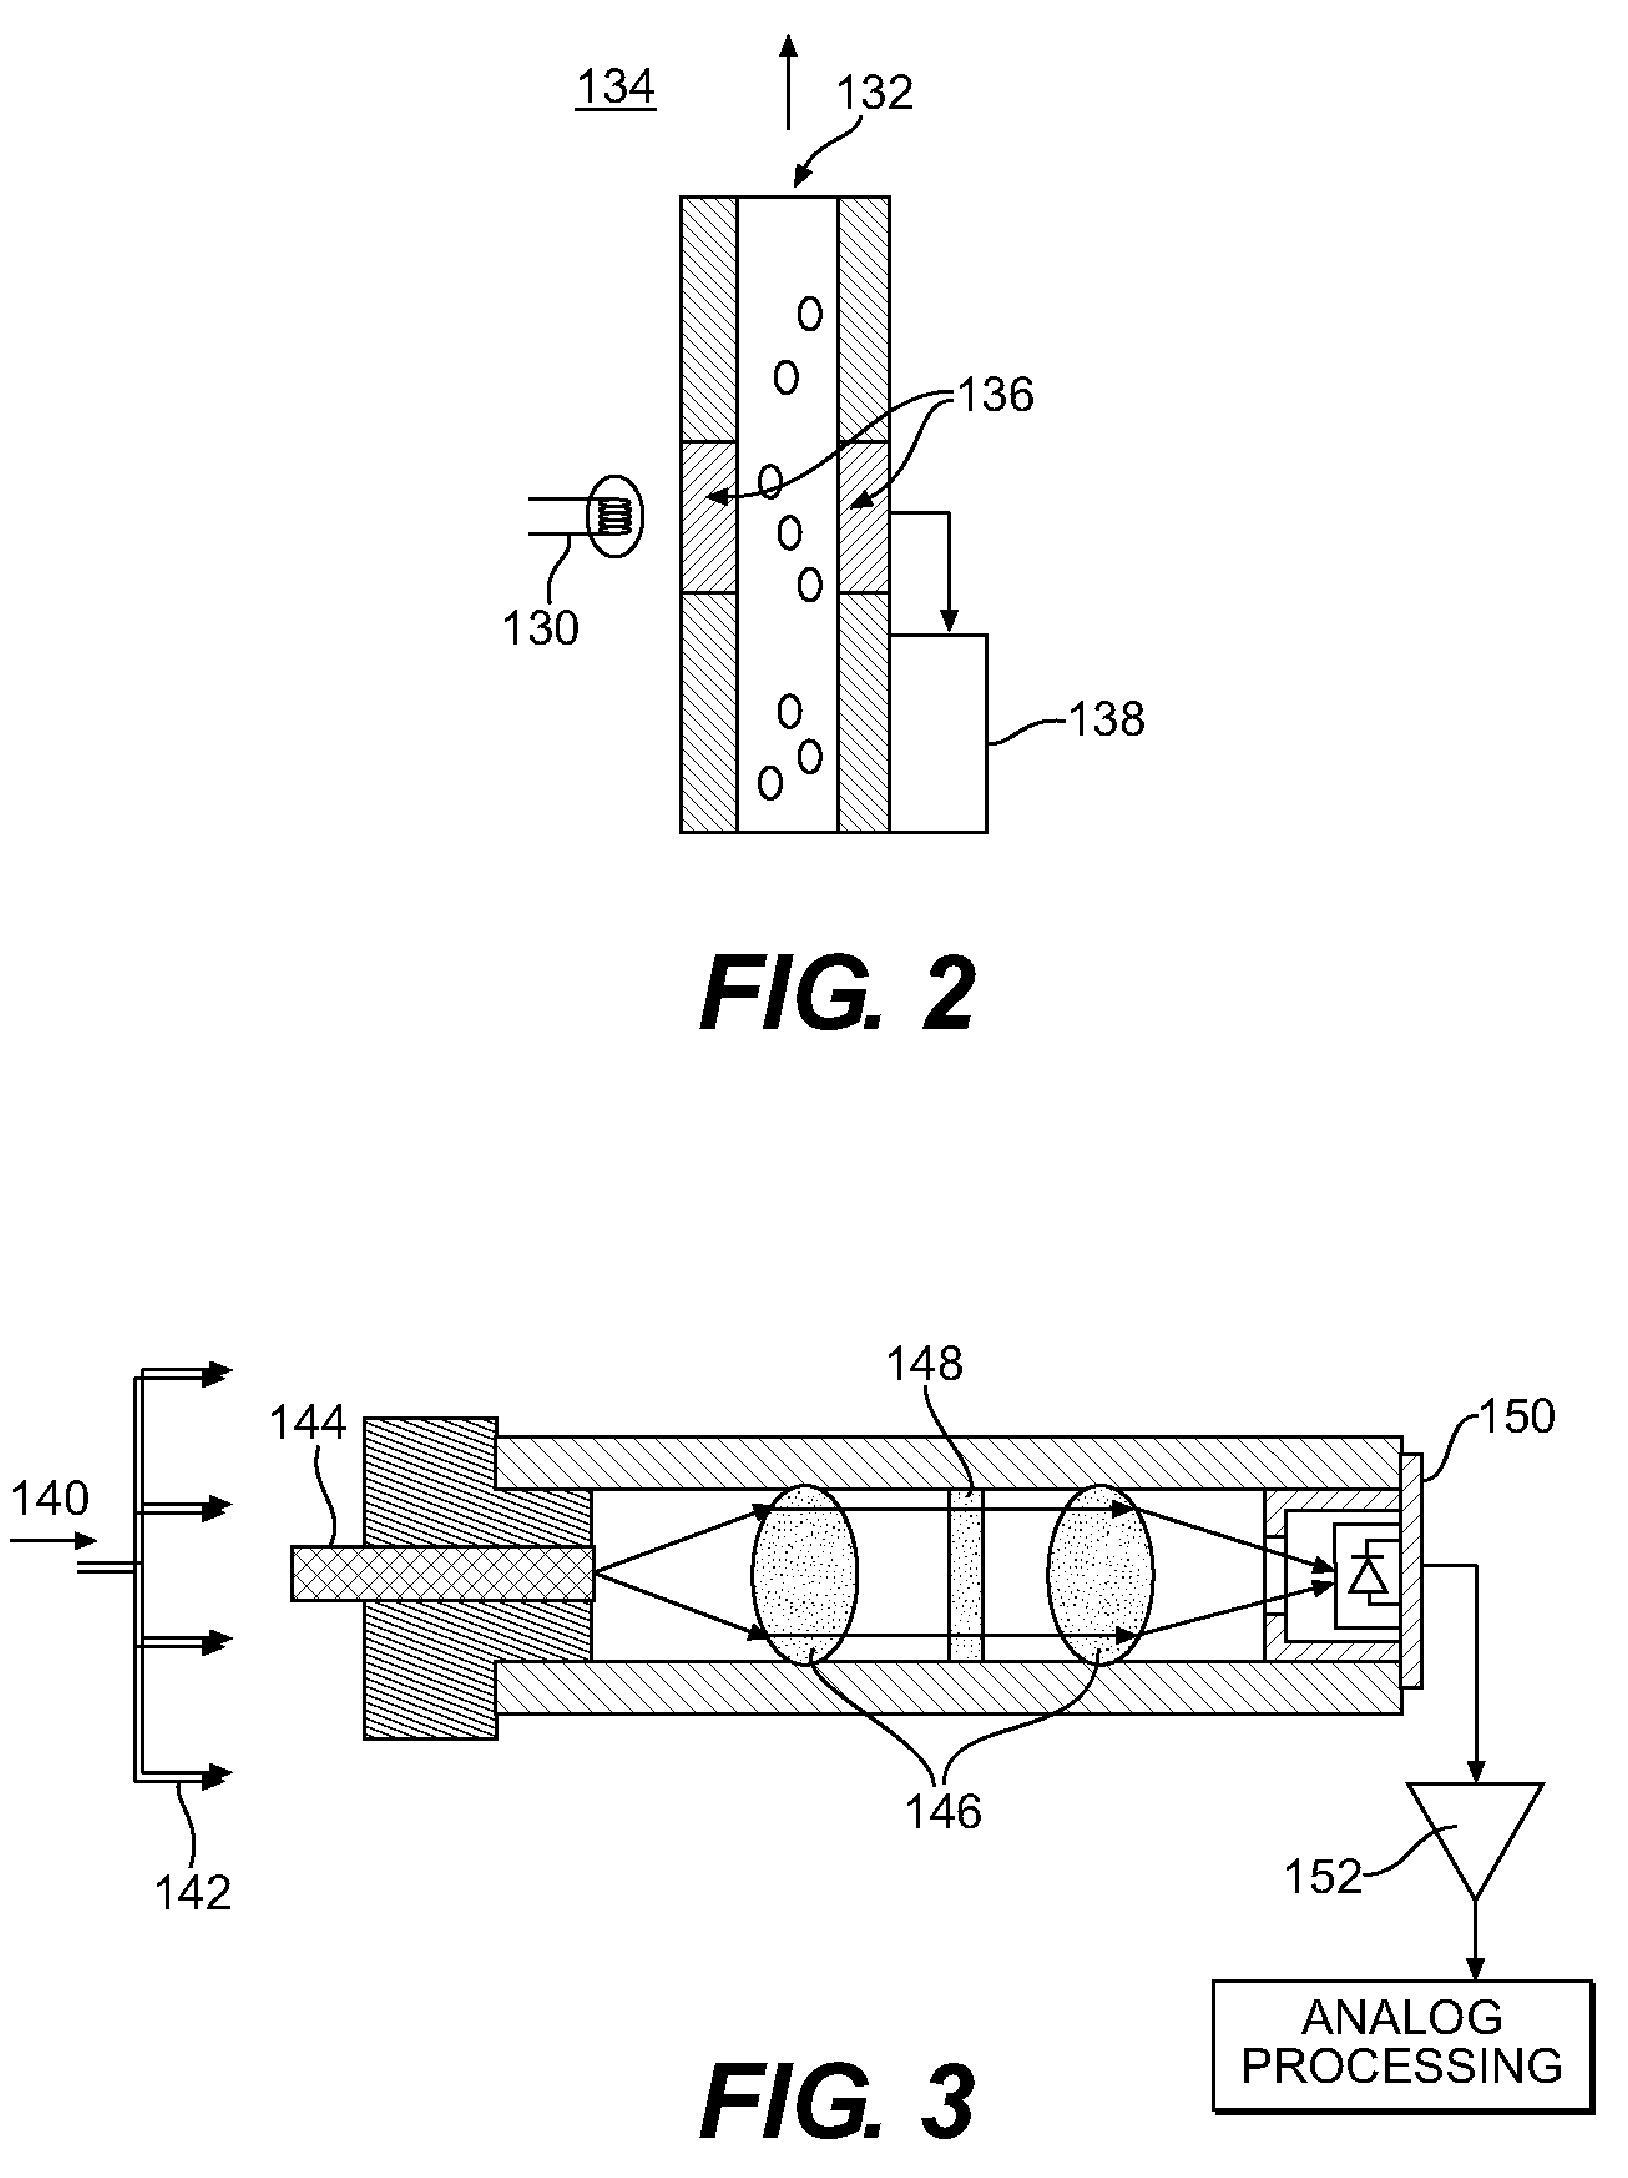 Method and apparatus for downhole spectral analysis of fluids